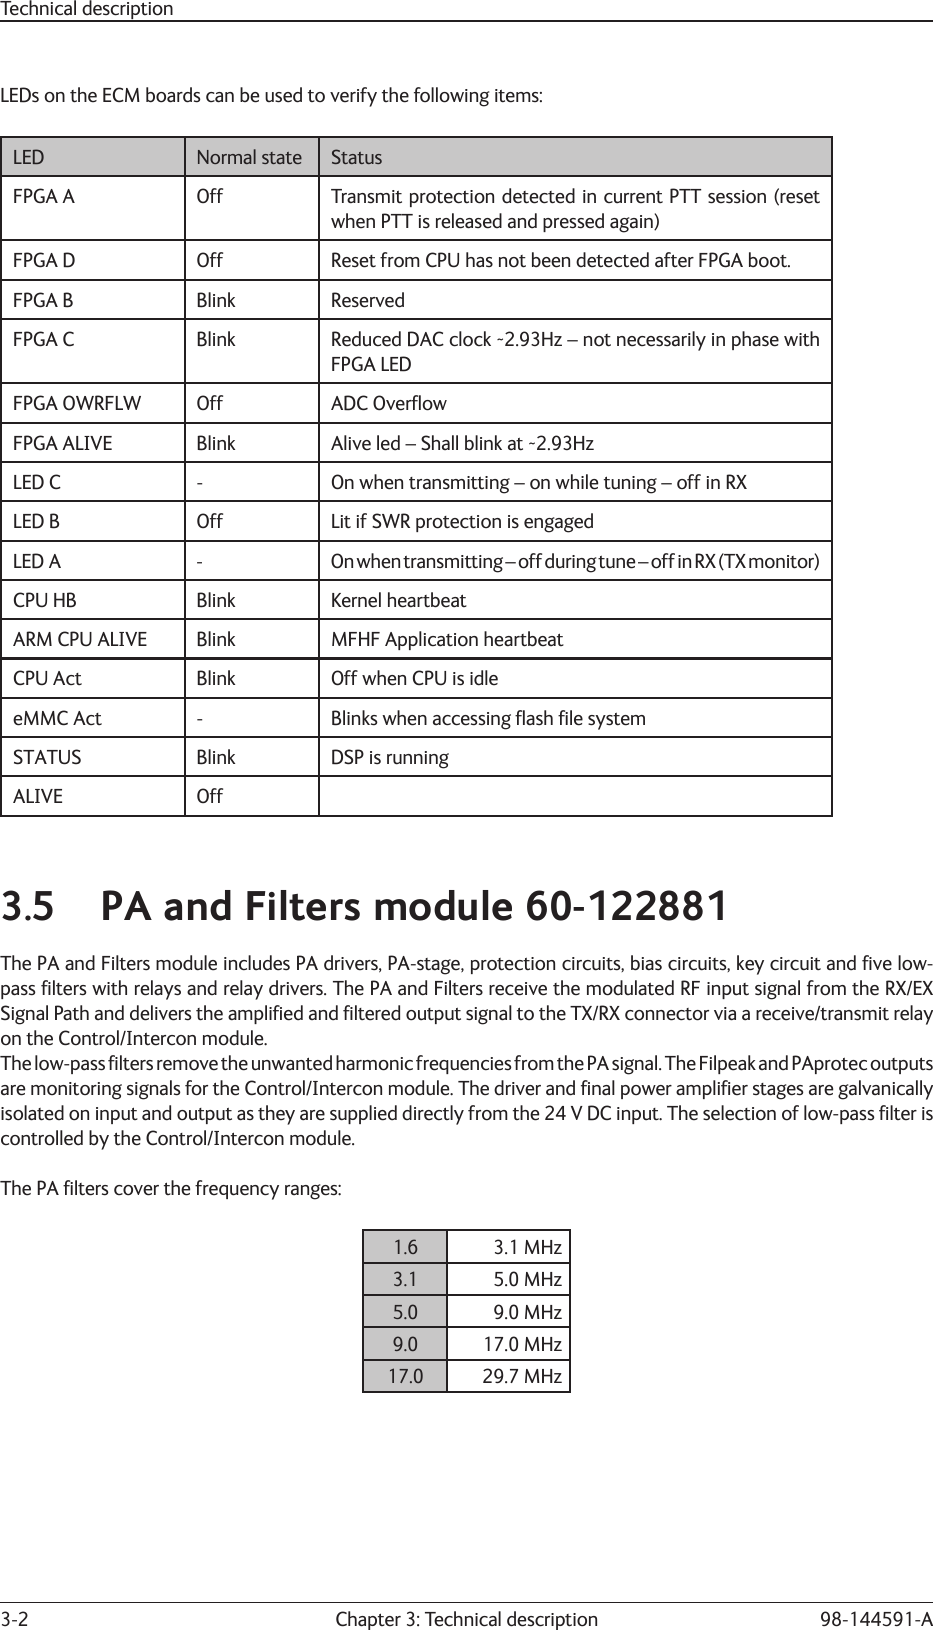 Chapter 3: Technical description3-2 98-144591-ALEDs on the ECM boards can be used to verify the following items:LED Normal state StatusFPGA A Off Transmit protection detected in current PTT session (reset when PTT is released and pressed again)FPGA D Off Reset from CPU has not been detected after FPGA boot.FPGA B Blink ReservedFPGA C Blink Reduced DAC clock ~2.93Hz – not necessarily in phase with FPGA LEDFPGA OWRFLW Off ADC Overﬂ owFPGA ALIVE Blink Alive led – Shall blink at ~2.93HzLED C - On when transmitting – on while tuning – off in RX LED B Off Lit if SWR protection is engagedLED  A - On when transmitting – off during tune – off in RX (TX monitor)CPU HB Blink Kernel heartbeatARM CPU ALIVE Blink MFHF Application heartbeatCPU Act Blink Off when CPU is idle eMMC Act - Blinks when accessing ﬂ ash ﬁ le systemSTATUS Blink DSP is runningALIVE Off         3.5  PA and Filters module 60-122881The PA and Filters module includes PA drivers, PA-stage, protection circuits, bias circuits, key circuit and ﬁ ve low-pass ﬁ lters with relays and relay drivers. The PA and Filters receive the modulated RF input signal from the RX/EX Signal Path and delivers the ampliﬁ ed and ﬁ ltered output signal to the TX/RX connector via a receive/transmit relay on the Control/Intercon module.The low-pass ﬁ  lters remove the unwanted harmonic frequencies from the PA signal. The Filpeak and PAprotec outputs are monitoring signals for the Control/Intercon module. The driver and ﬁ nal power ampliﬁ er stages are galvanically isolated on input and output as they are supplied directly from the 24 V DC input. The selection of low-pass ﬁ lter is controlled by the Control/Intercon module.The PA ﬁ lters cover the frequency ranges:1.6 3.1 MHz3.1 5.0 MHz5.0 9.0 MHz9.0 17.0 MHz17.0 29.7 MHzTechnical description